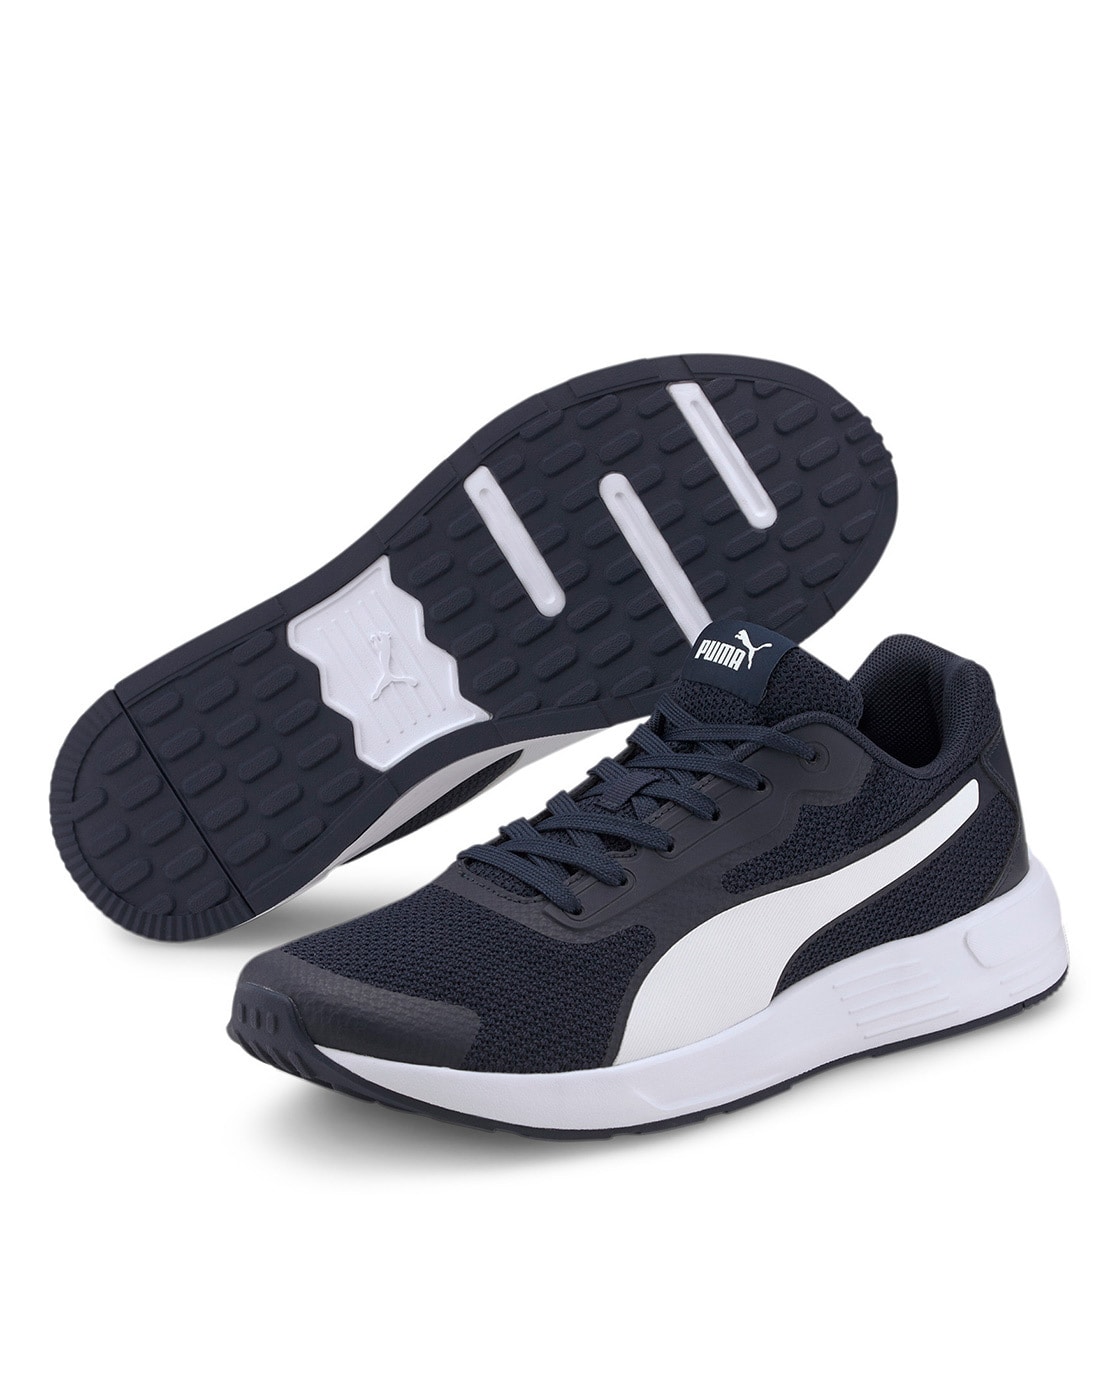 Buy Men Black & Red Puma Cave V2 Running Shoes from Fancode Shop.